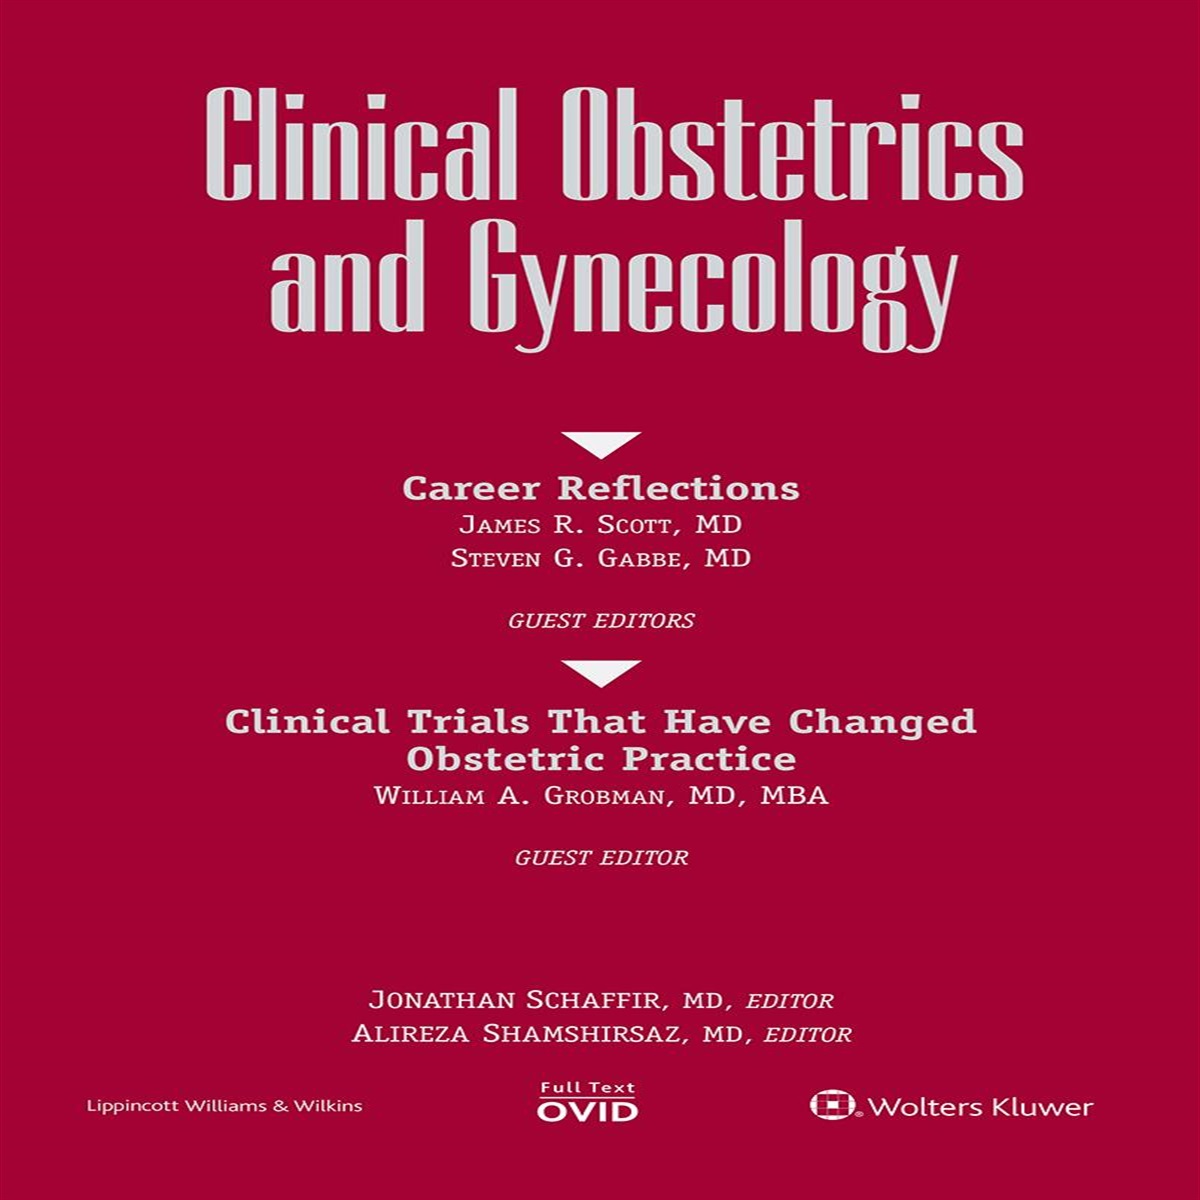 Contributors: Clinical Trials That Have Changed Obstetric Practice